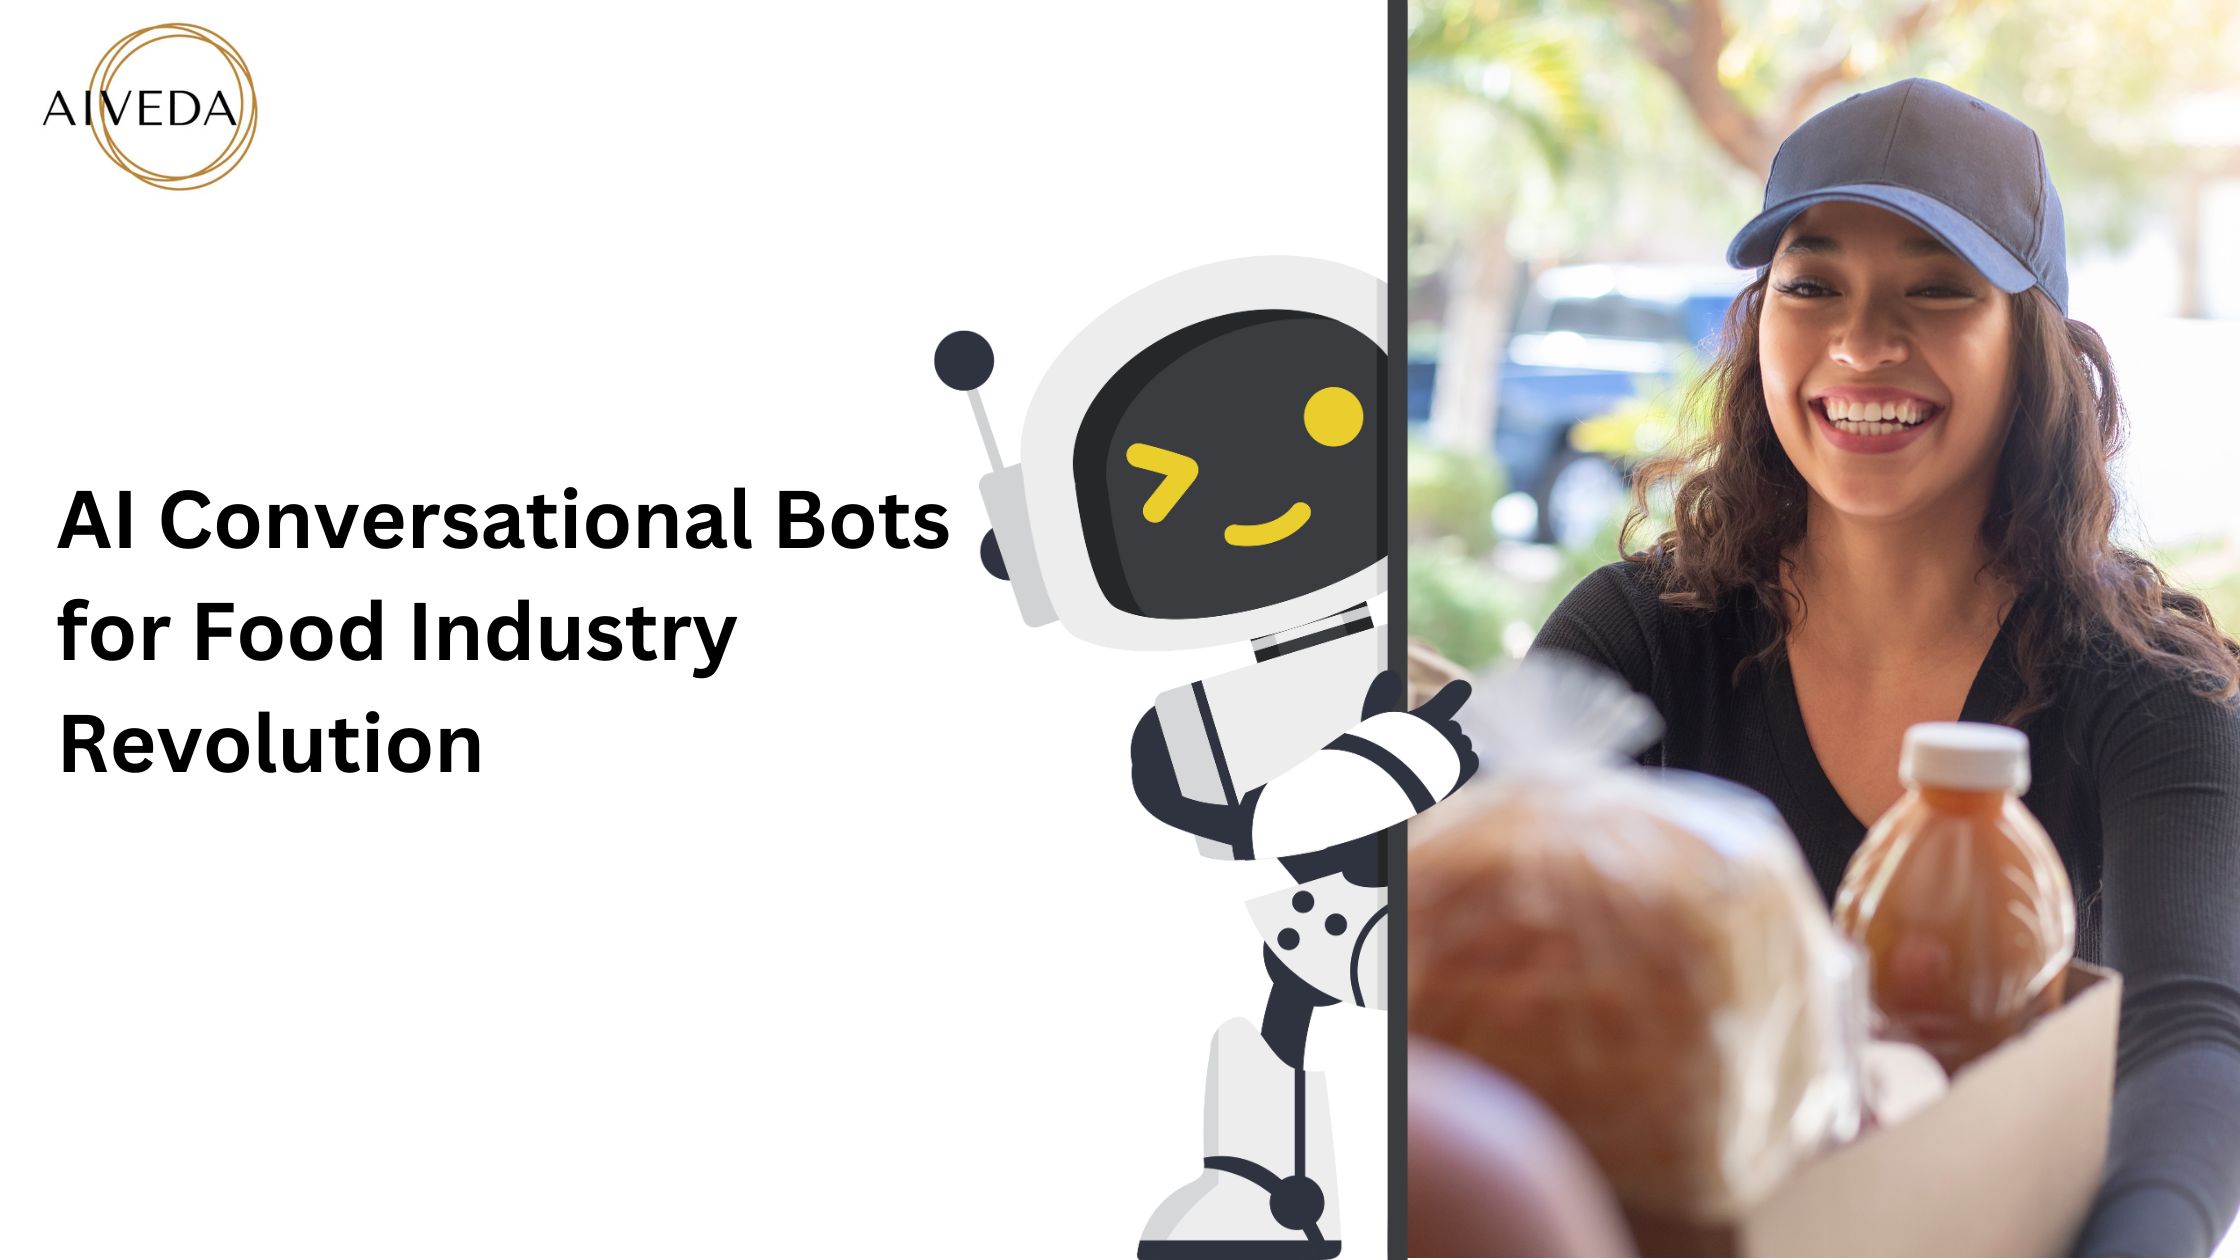 AI Conversational Bots: The Future of Innovation in the Food Industry